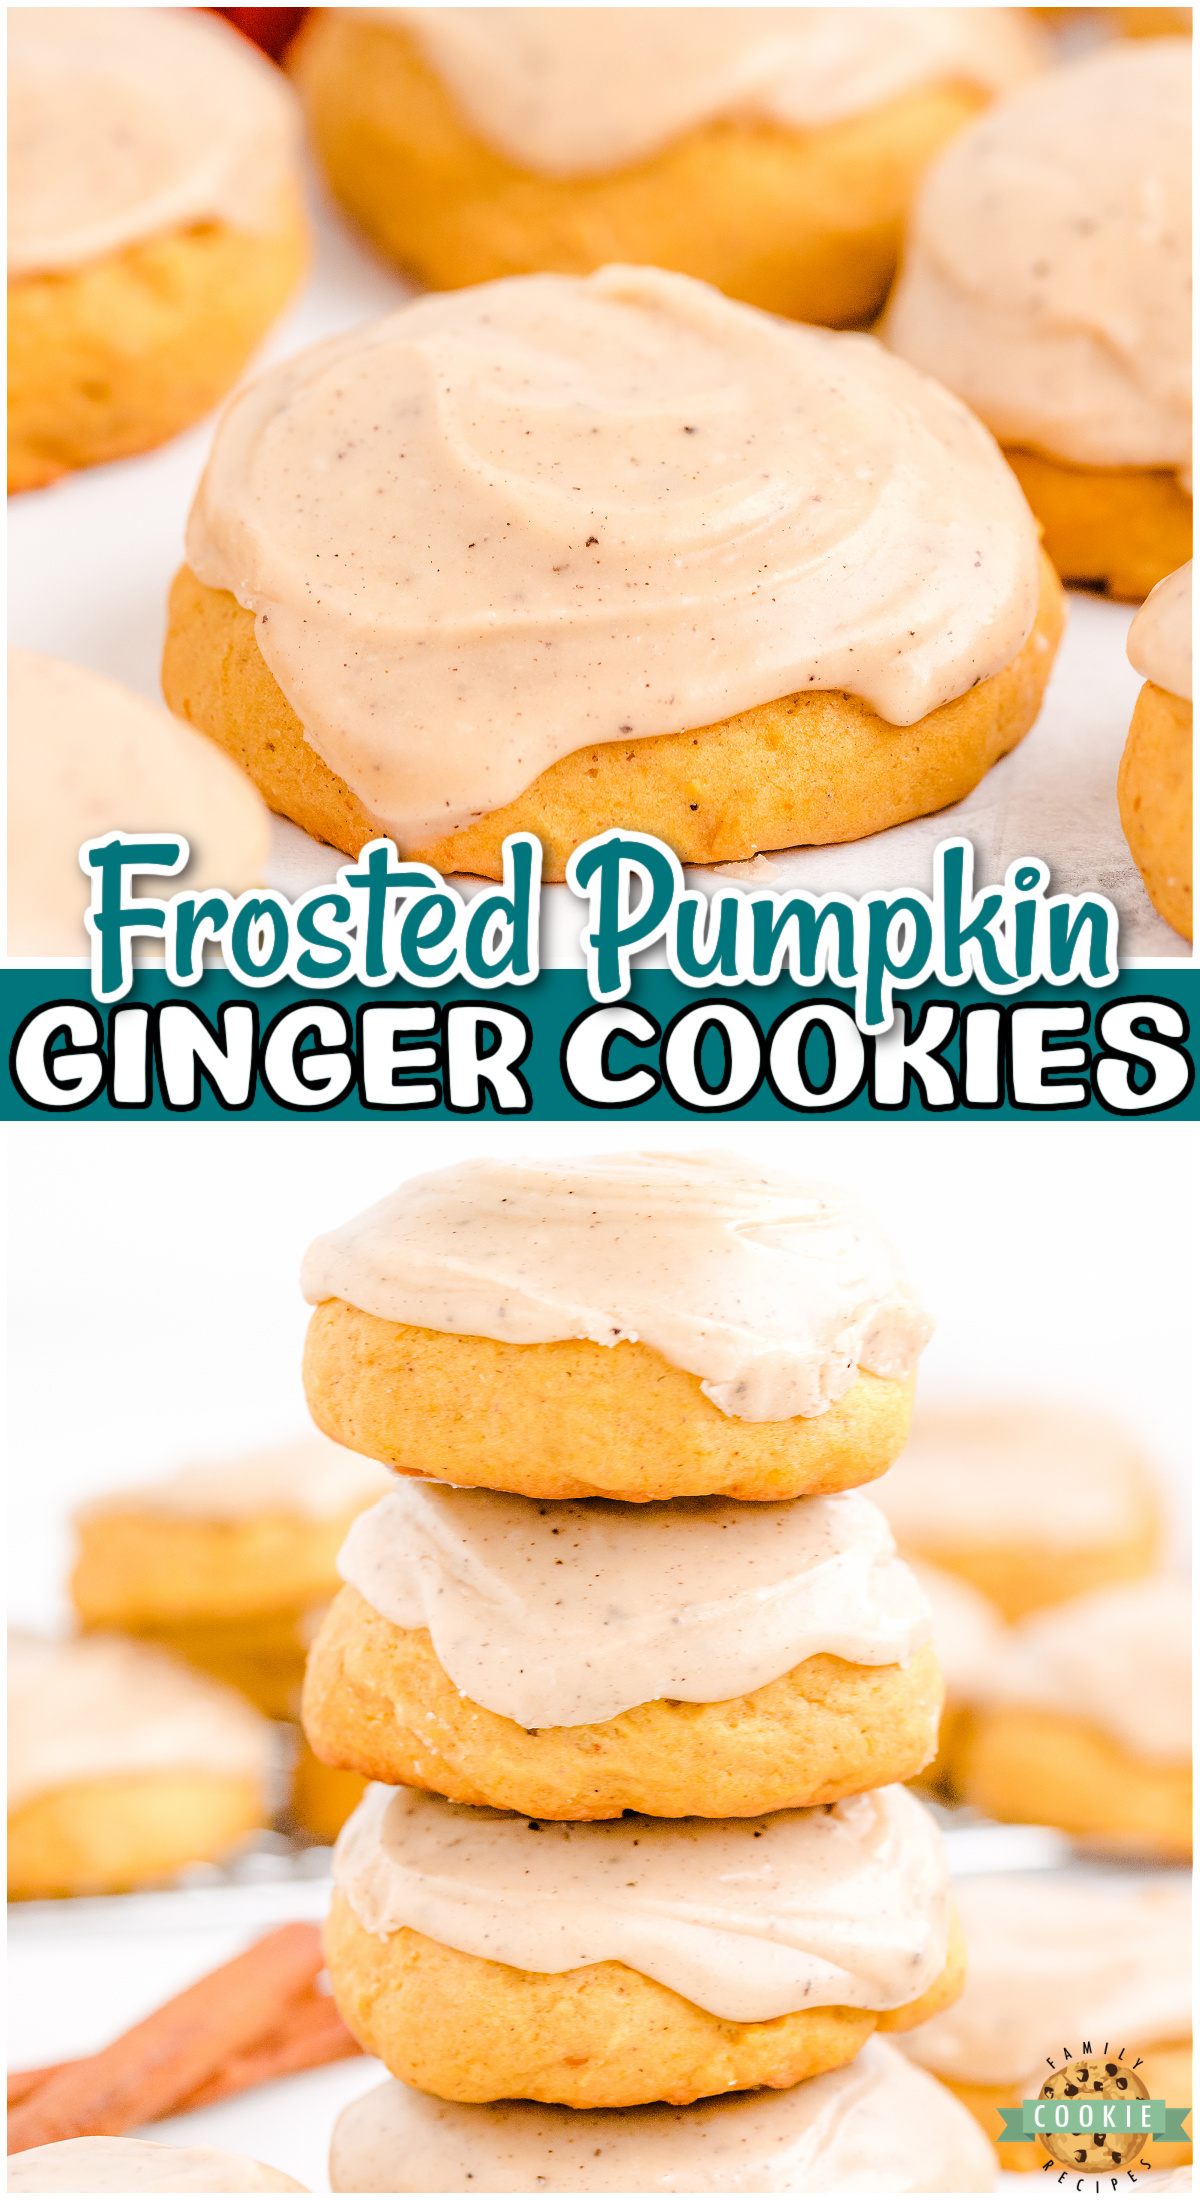 Frosted Pumpkin Ginger Cookies are a delightfully spiced Fall treat! These pumpkin cookies are soft & chewy with a sensational brown butter frosting on top.